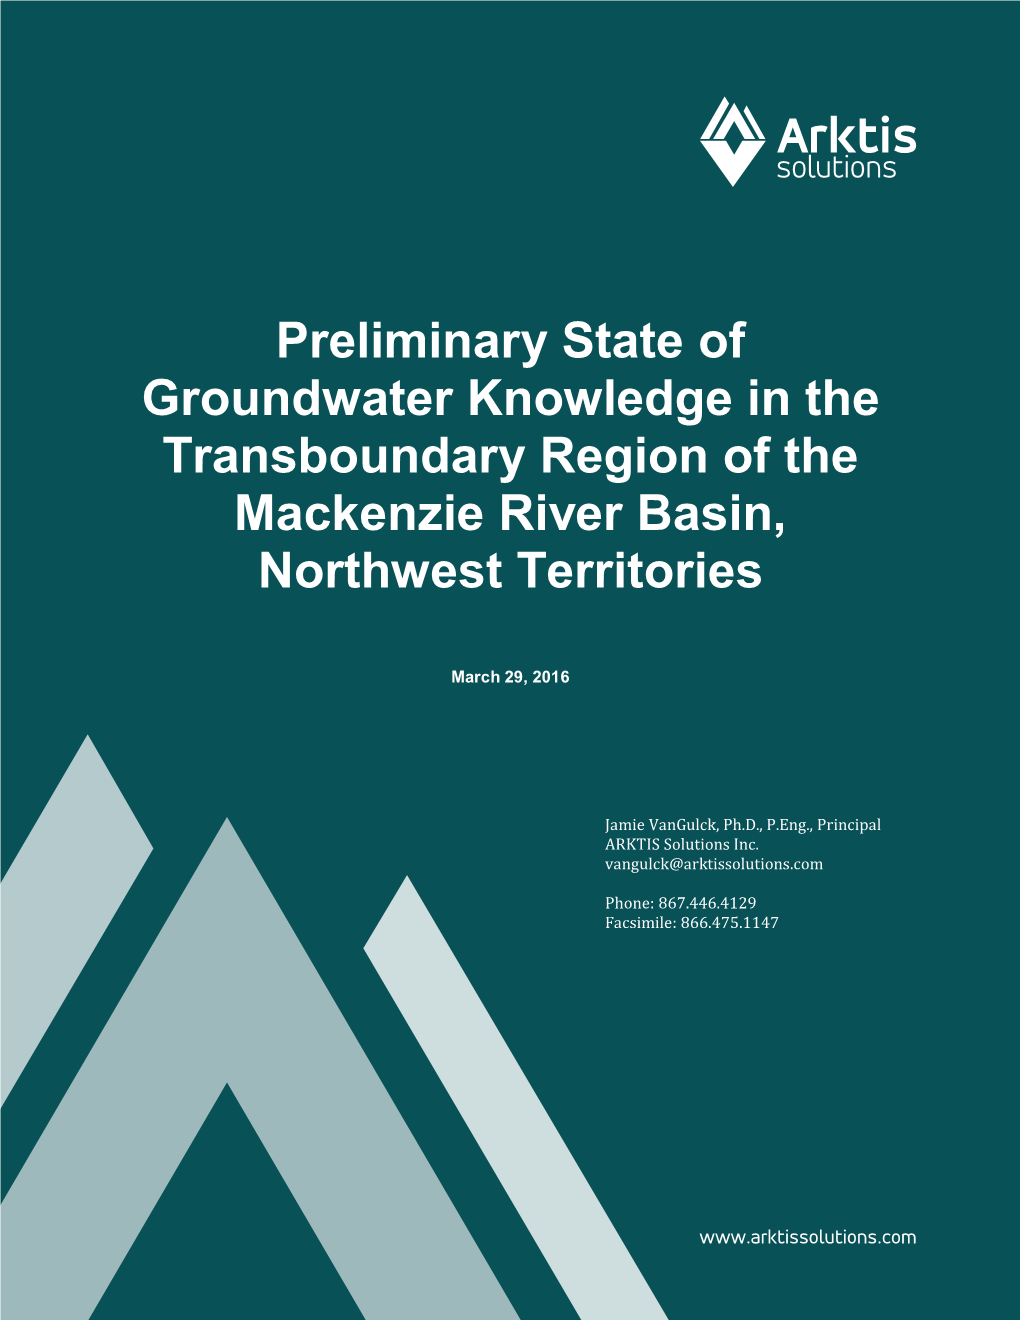 Preliminary State of Groundwater Knowledge in the Transboundary Region of the Mackenzie River Basin, Northwest Territories